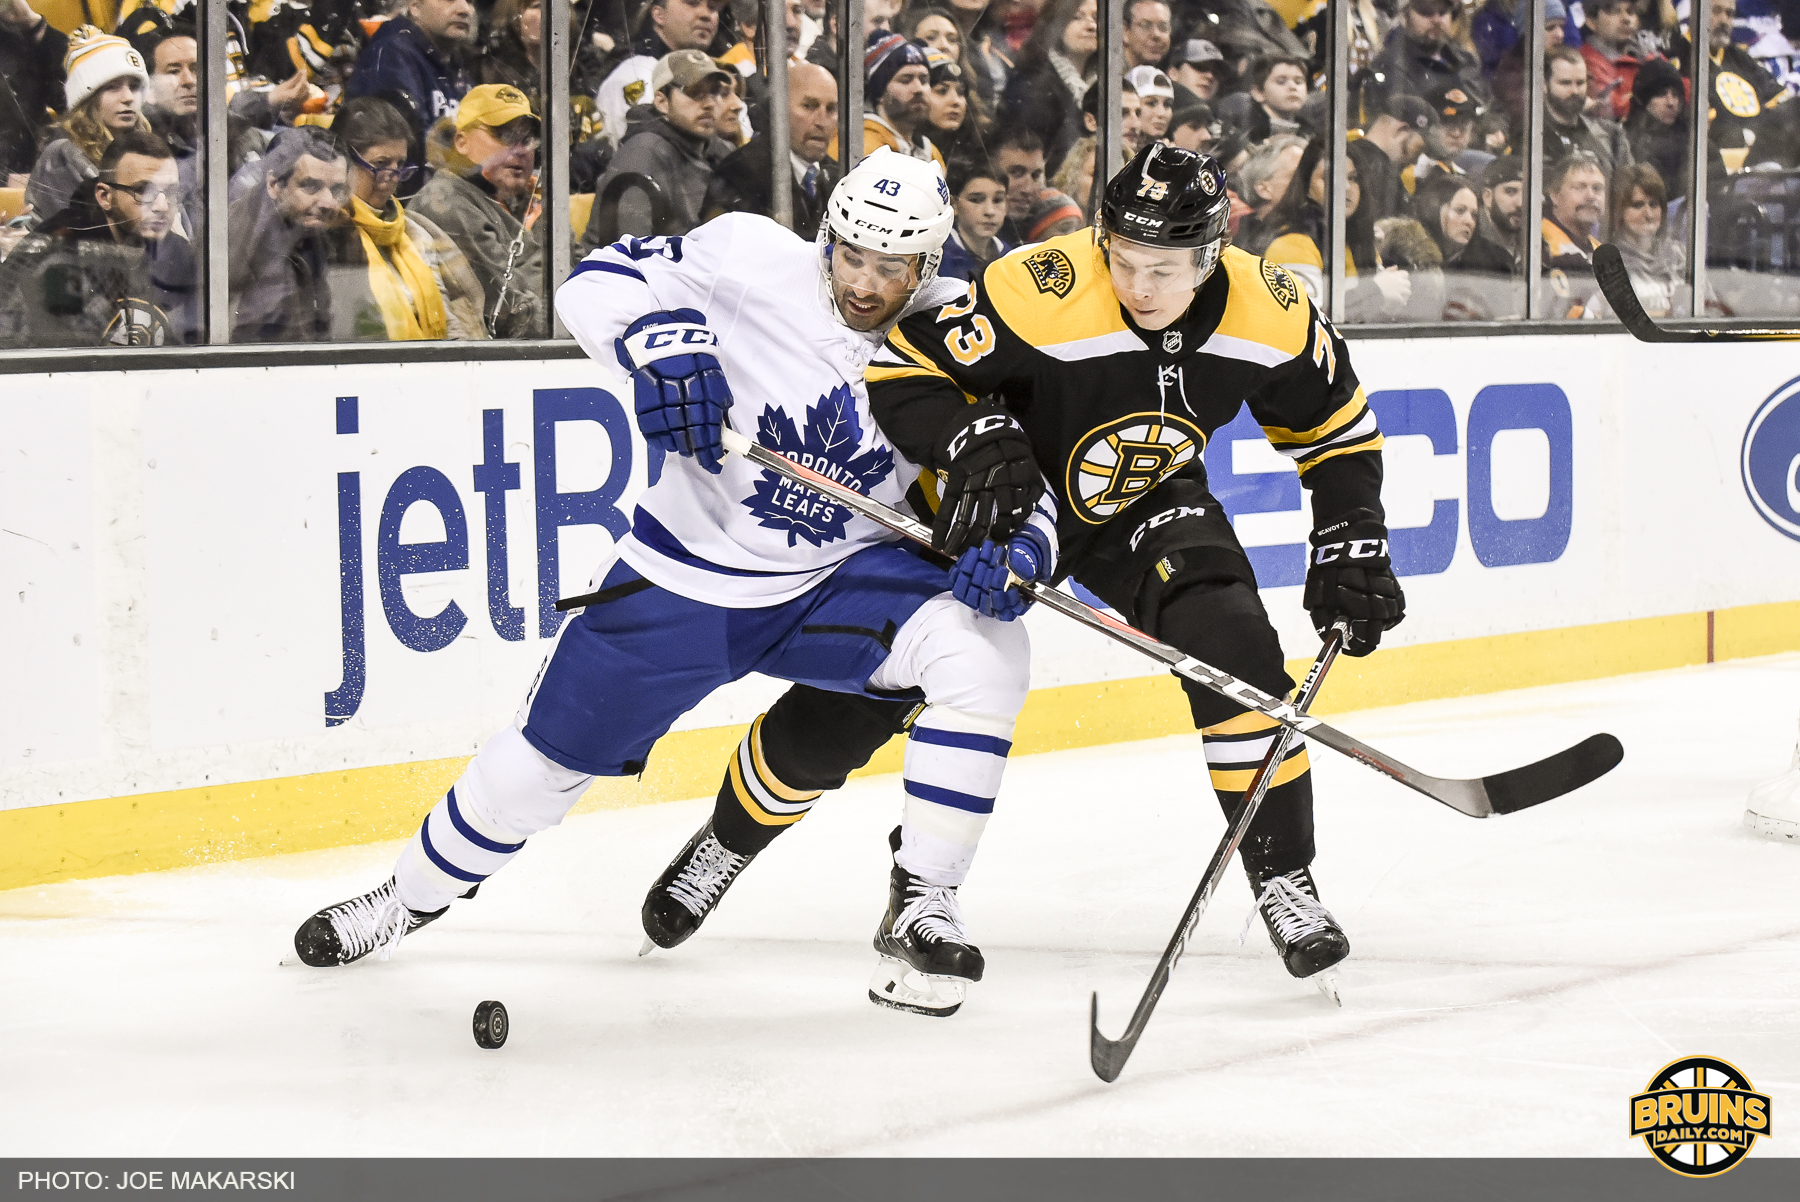 5 Bruins games to watch in 2018-19